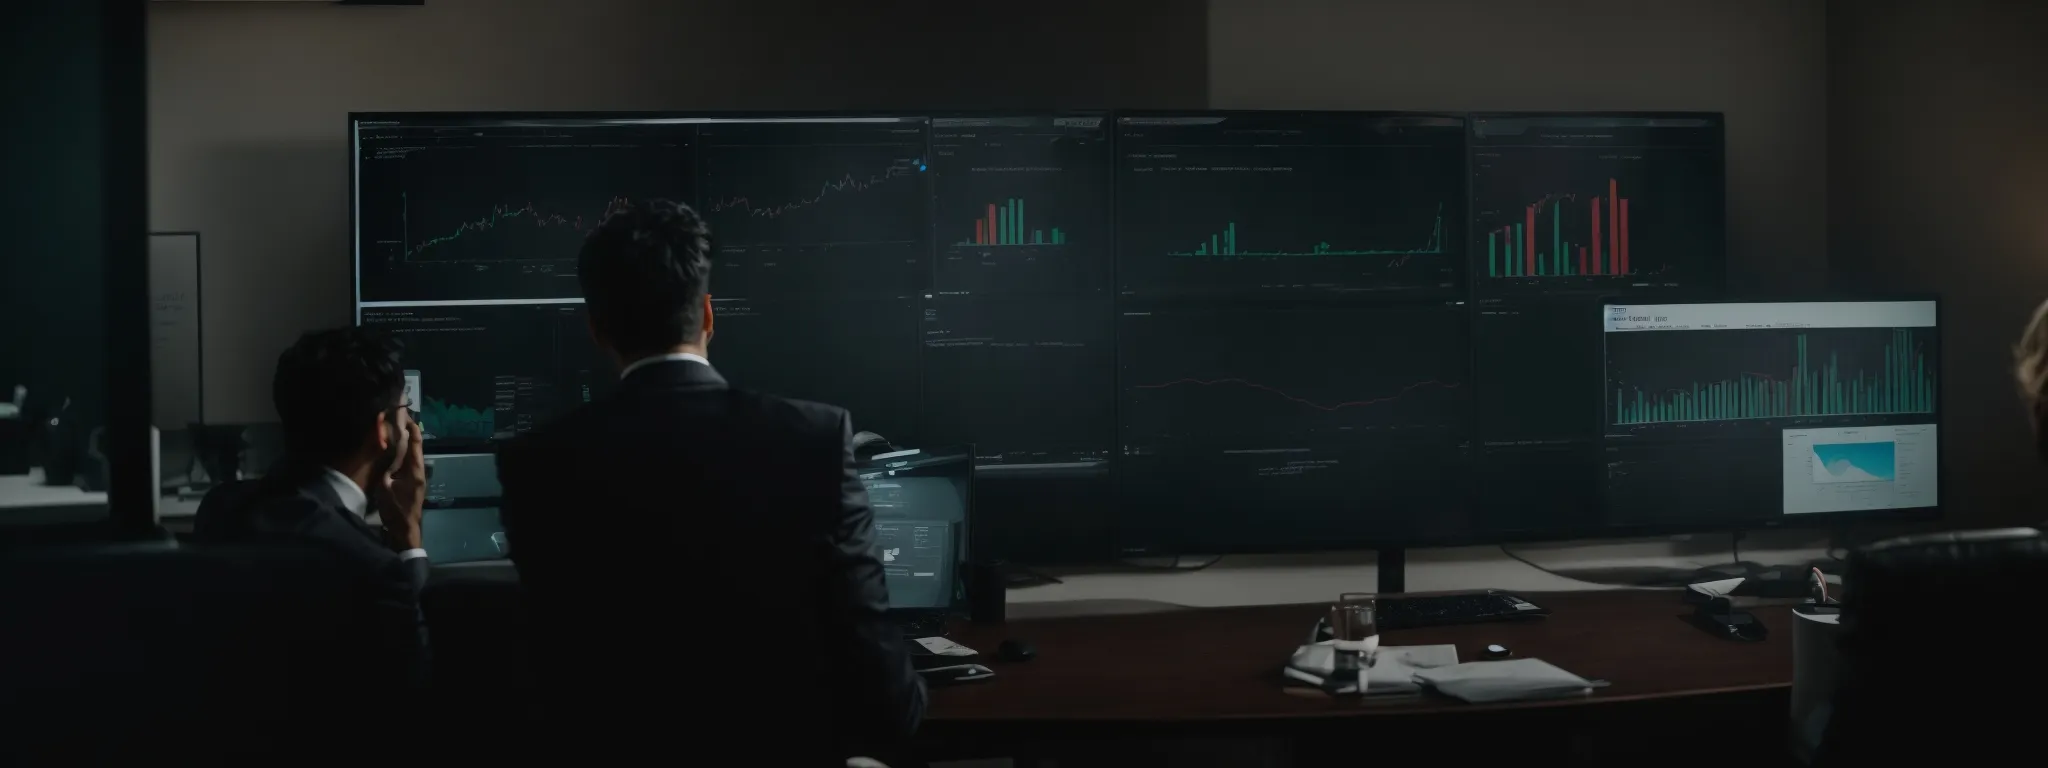 a strategy meeting with a large monitor displaying a website's analytics dashboard.